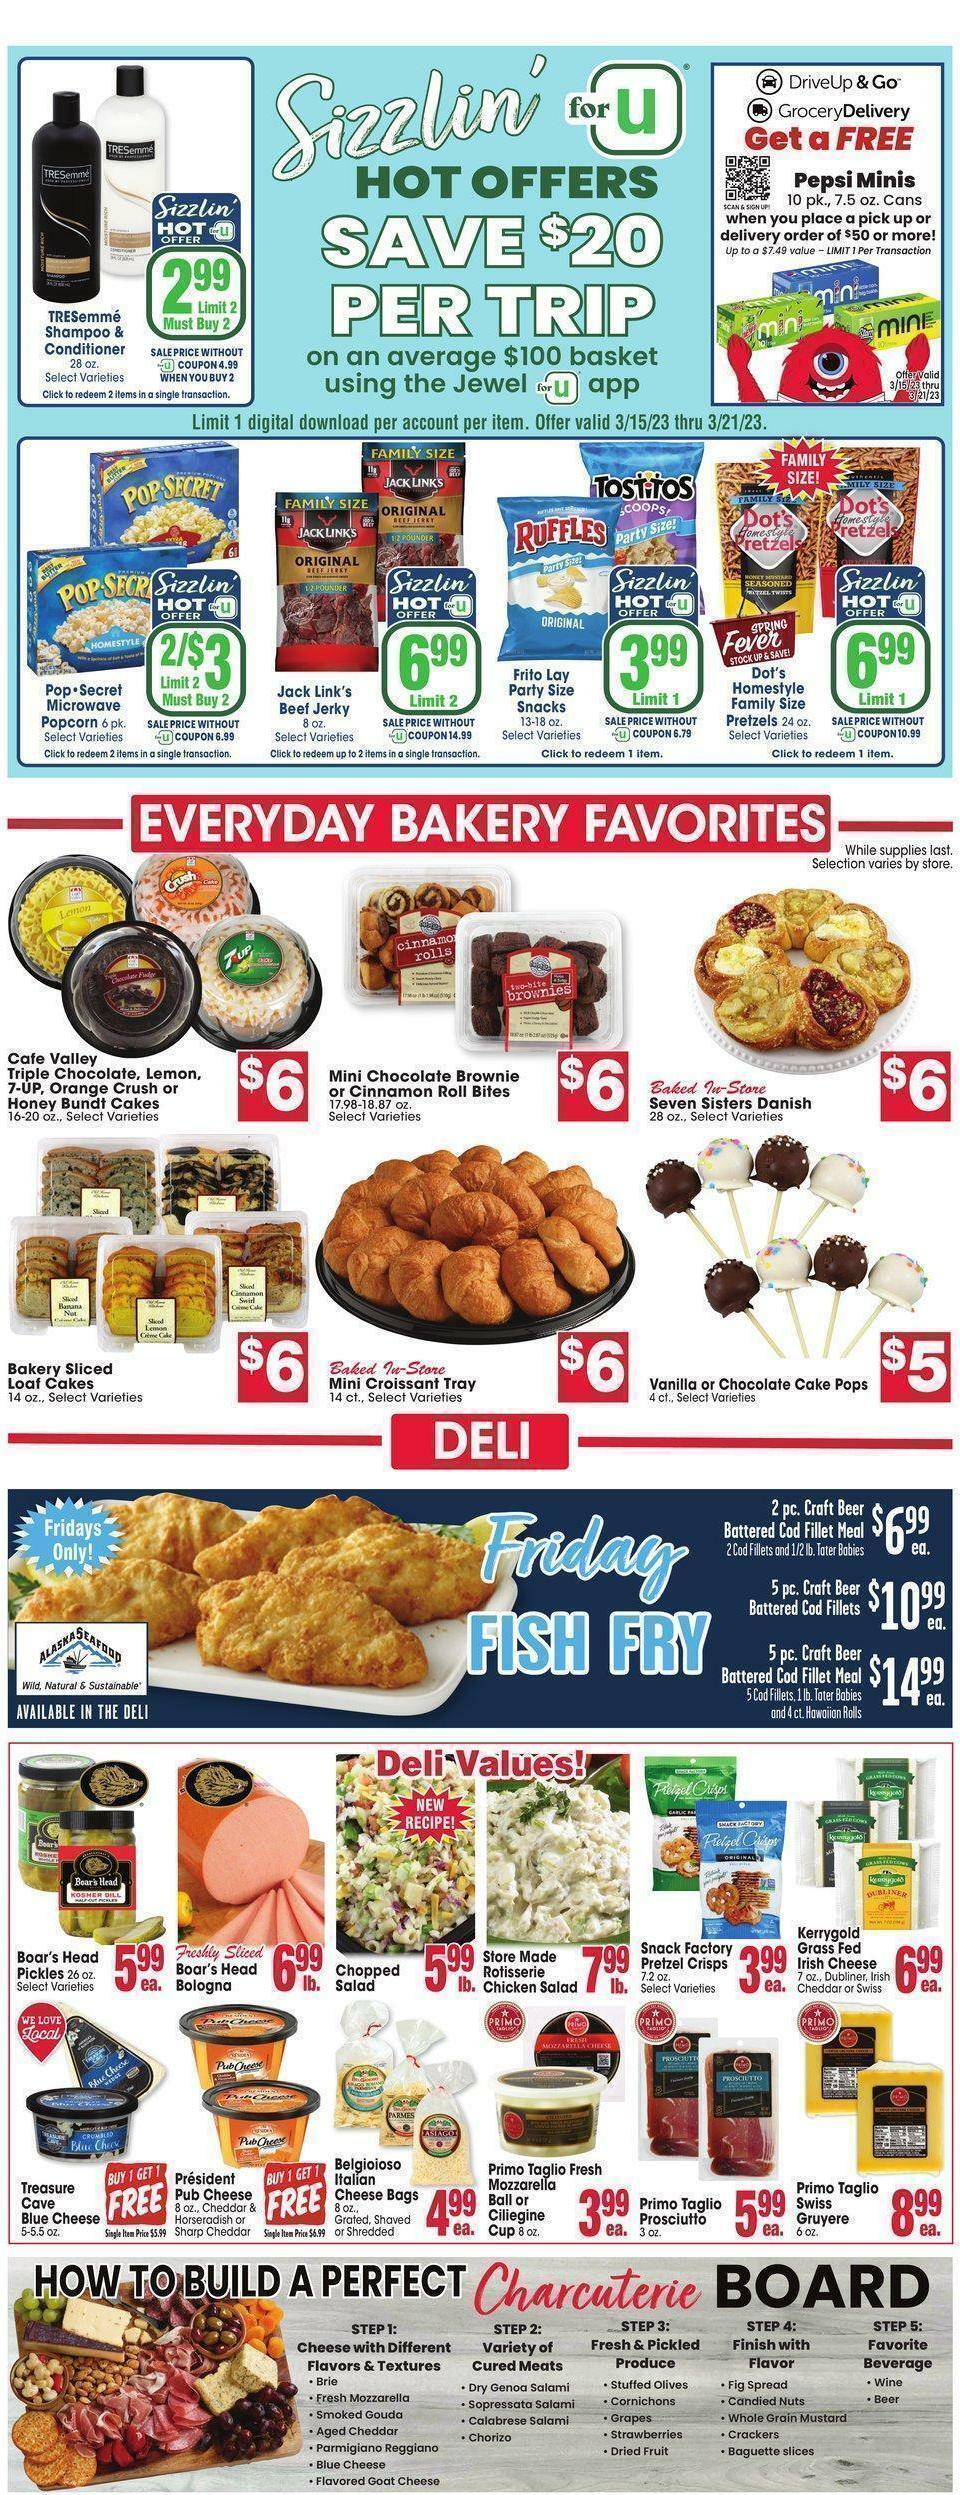 Jewel Osco Weekly Ad from March 15